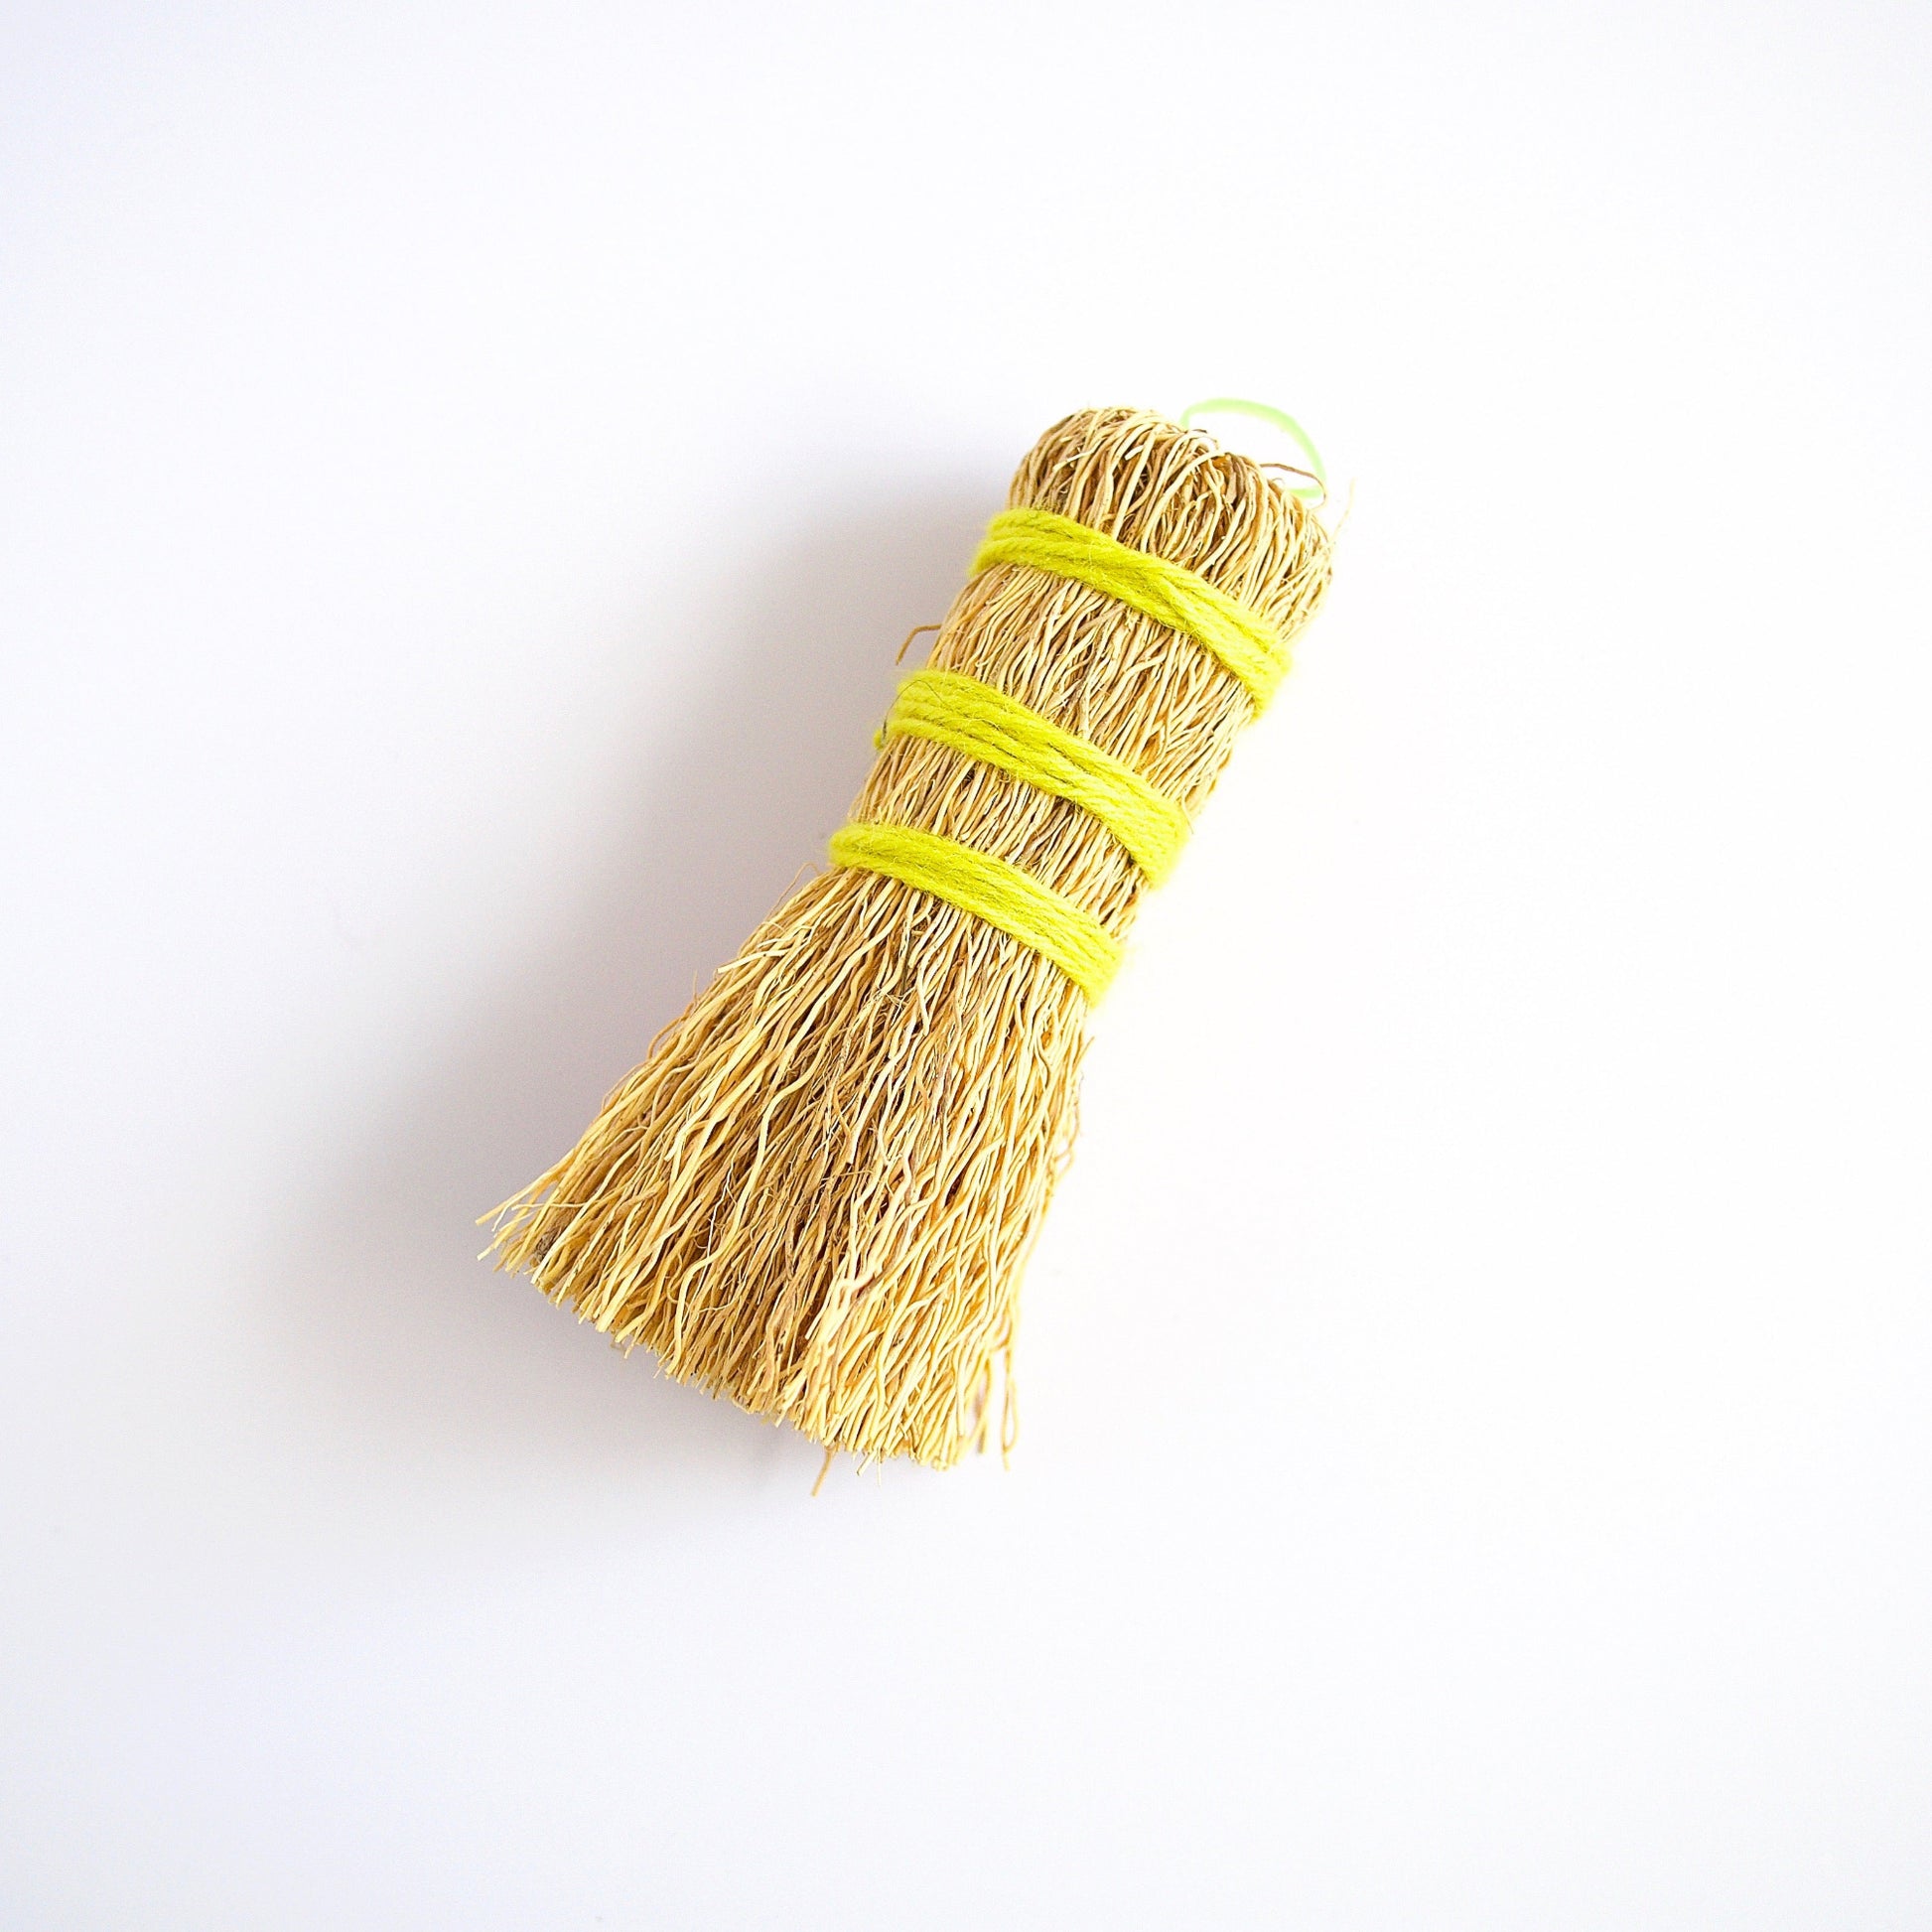 Escobeta de raiz Mexican dish scrubber made from plant roots wrapped in yellow wool yarn